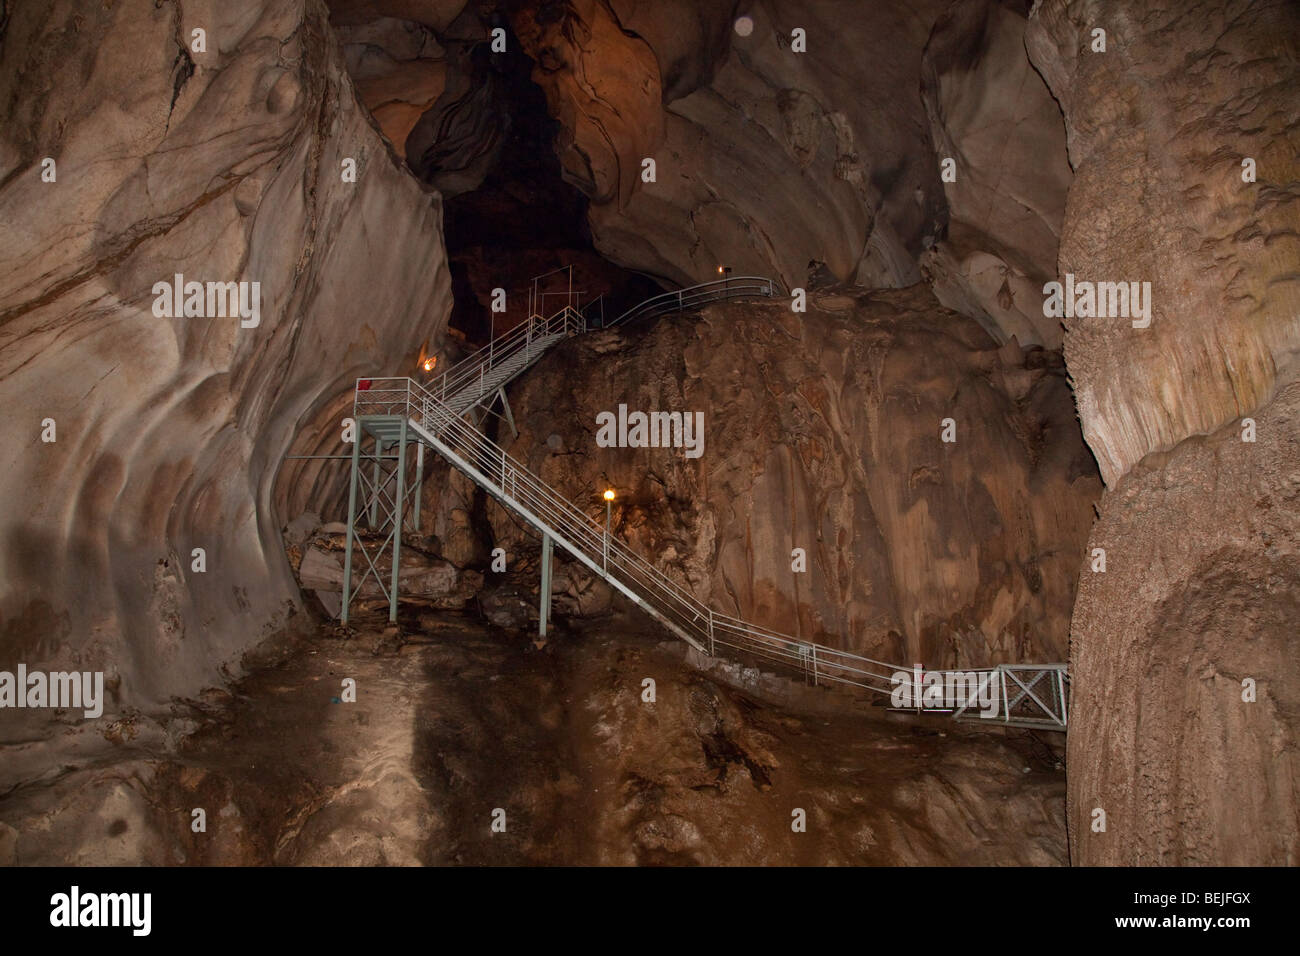 Gua Tempurung cave interior showing large stalacmite and walkways. Stock Photo